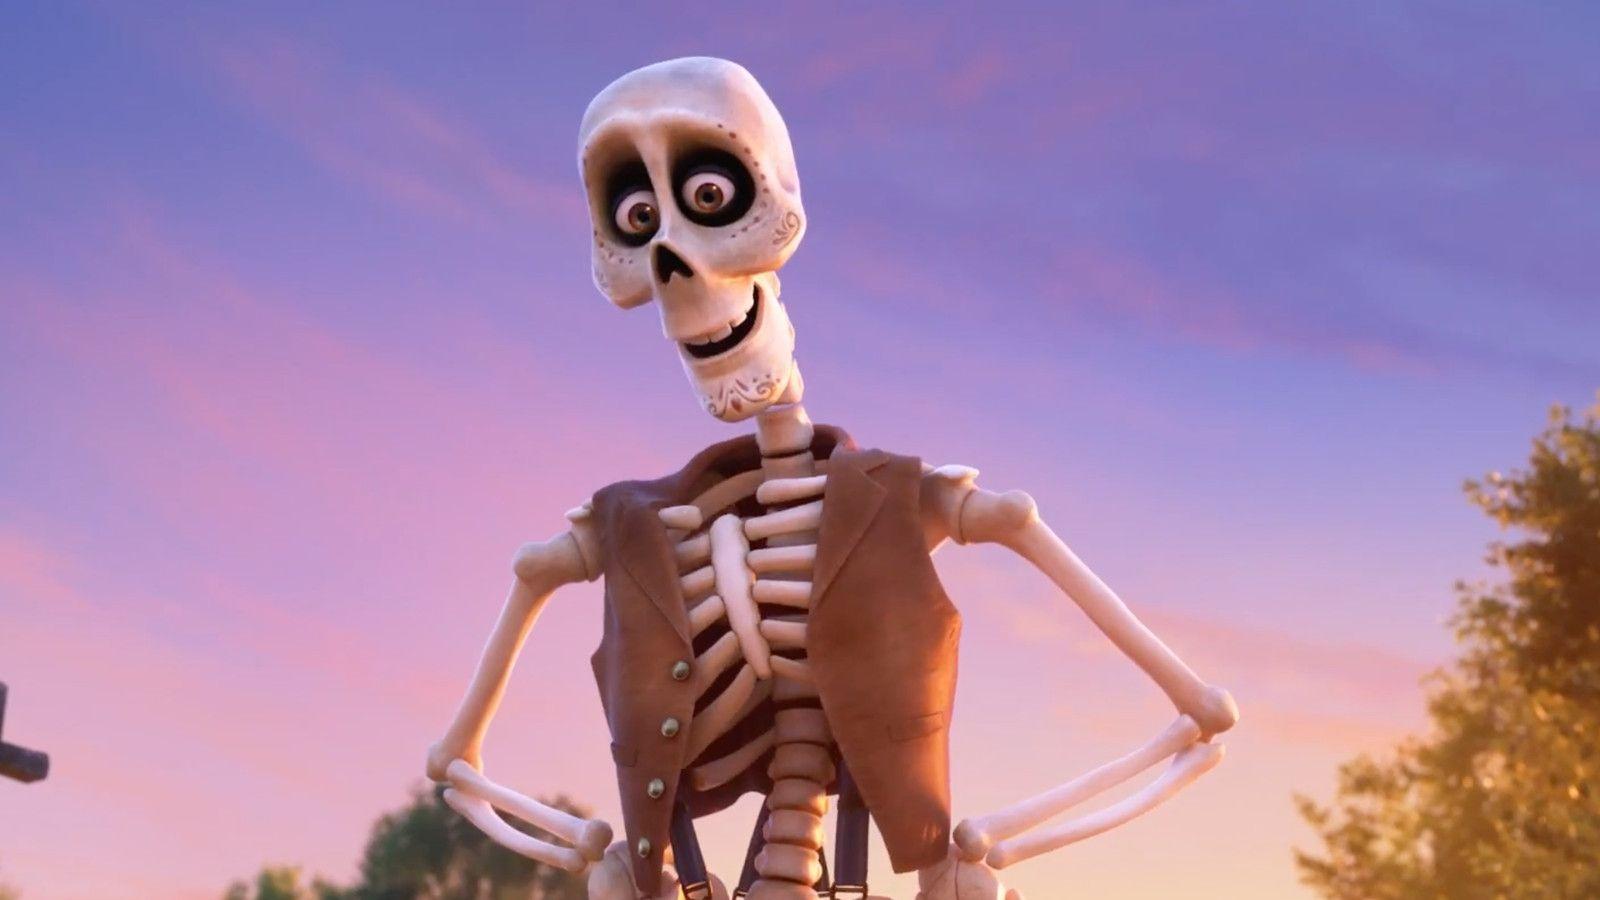 Watch a new Pixar short set in the Coco universe